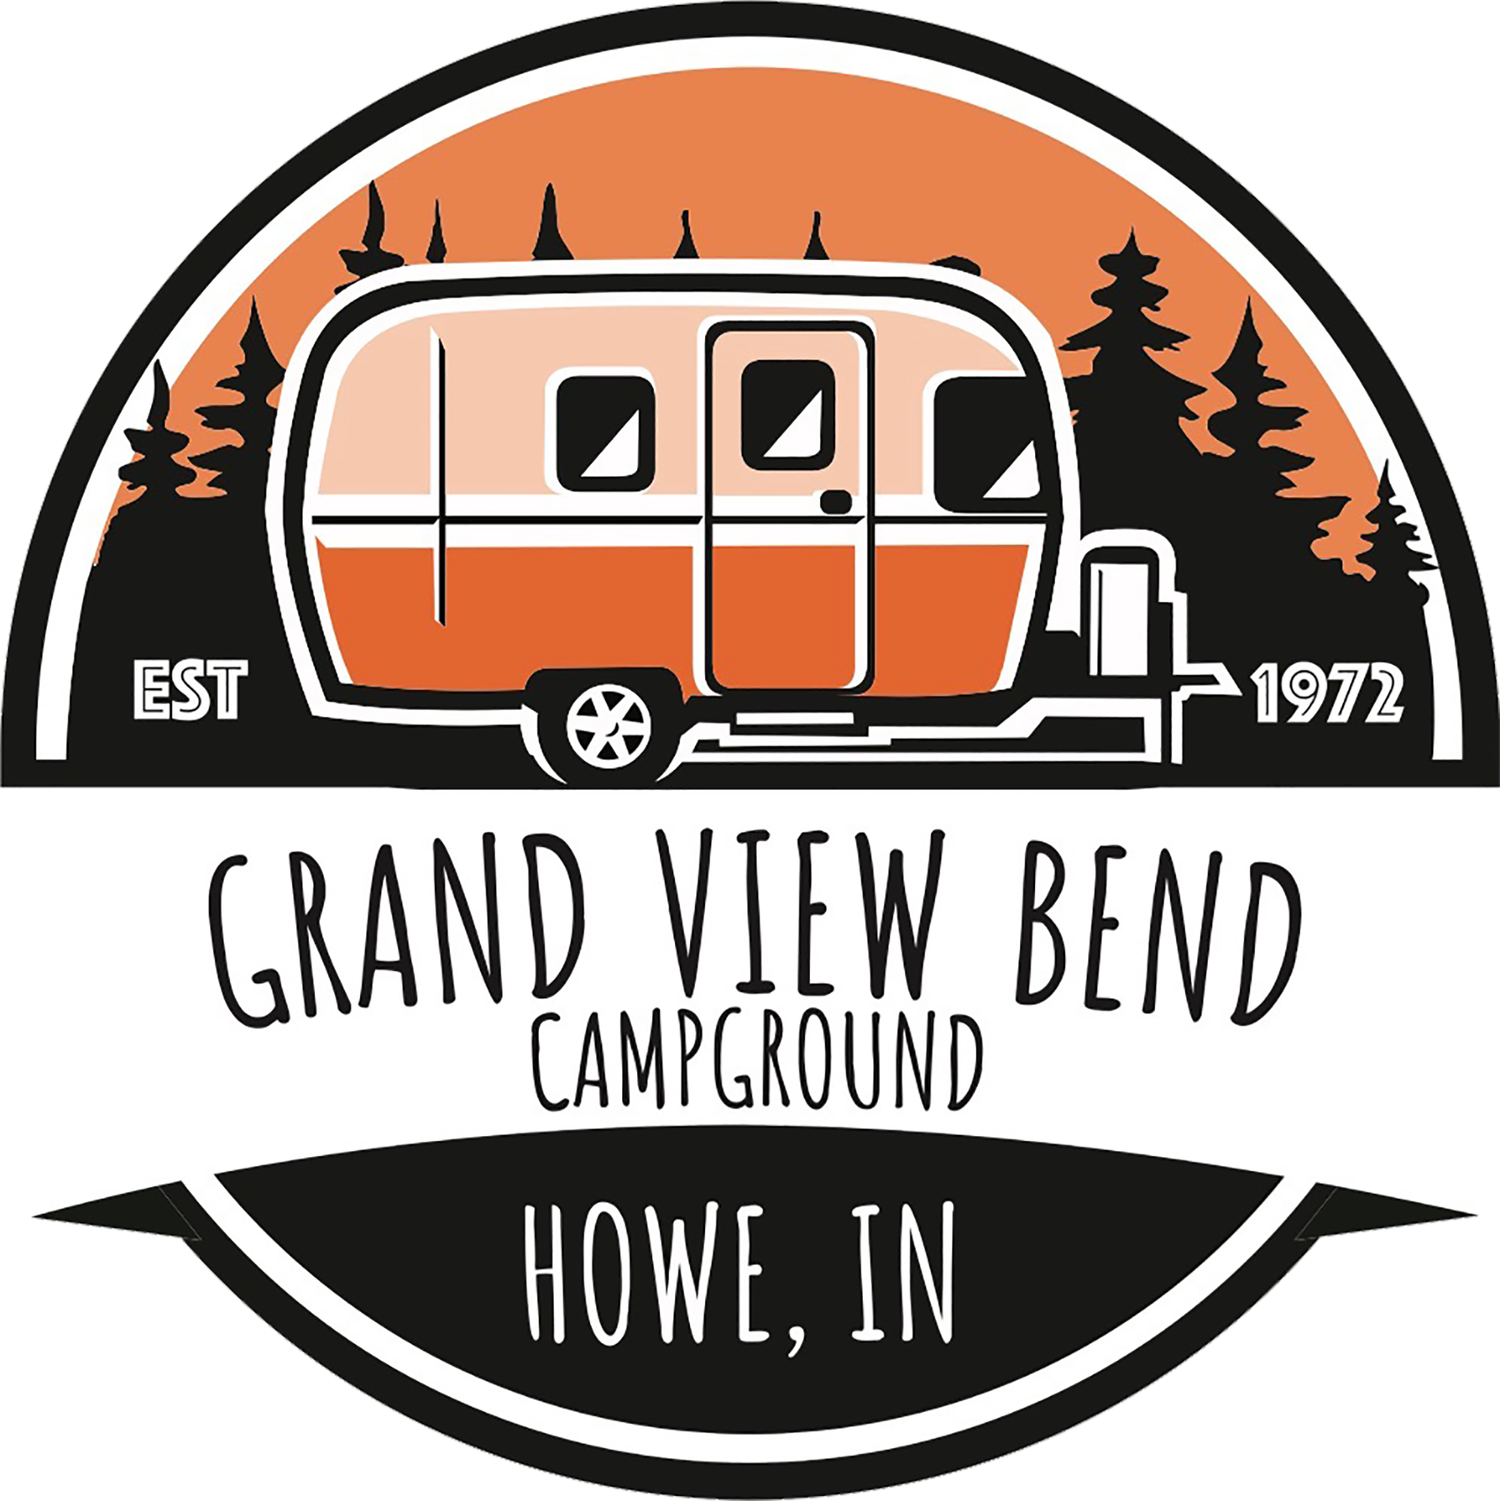 Grandview Bend Family Campground